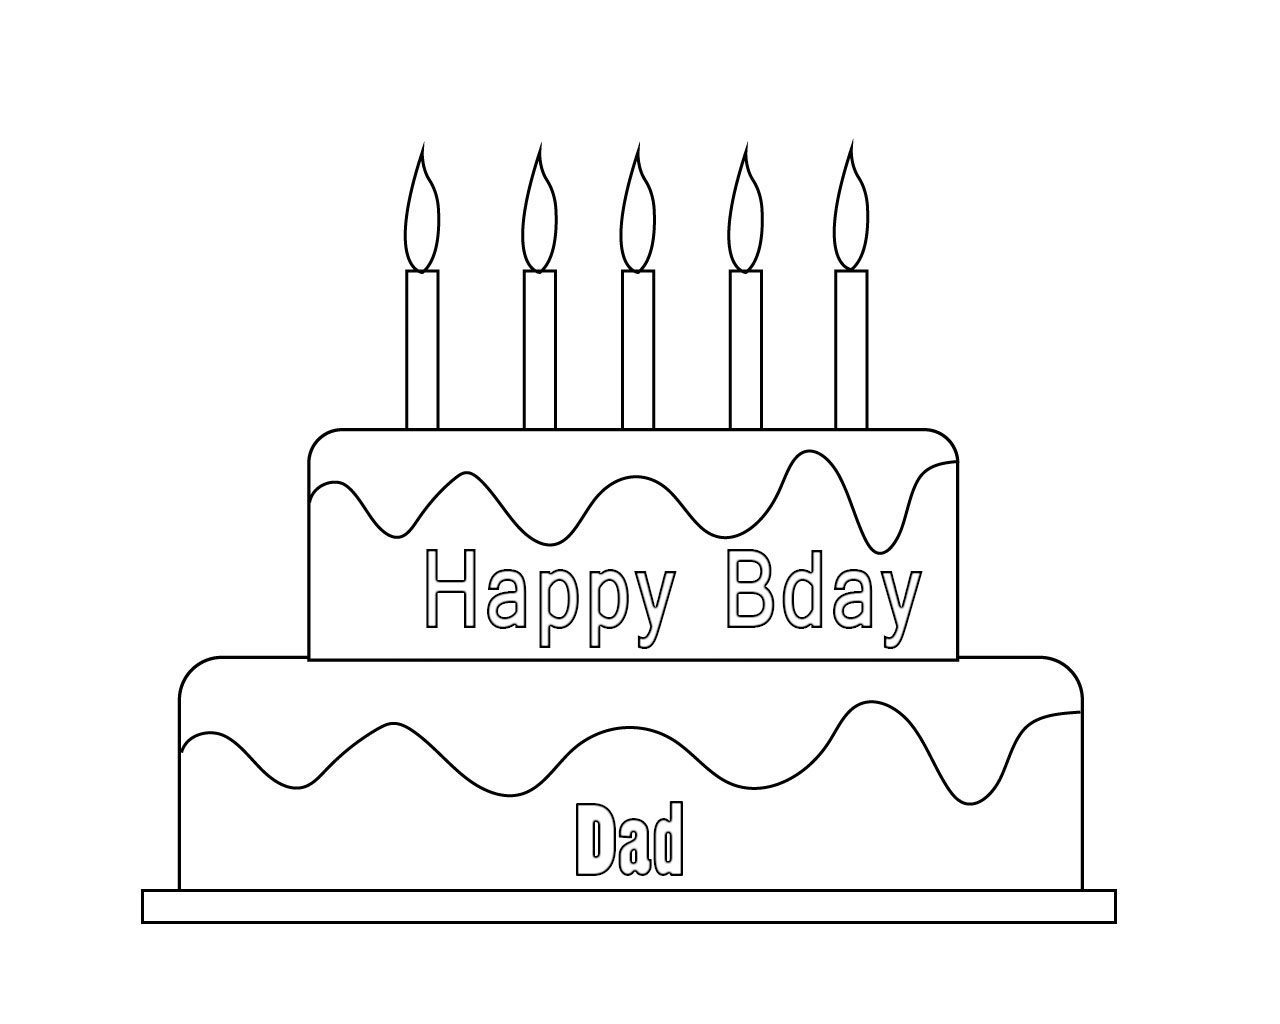 Personalized Happy Birthday Coloring Pages To Print